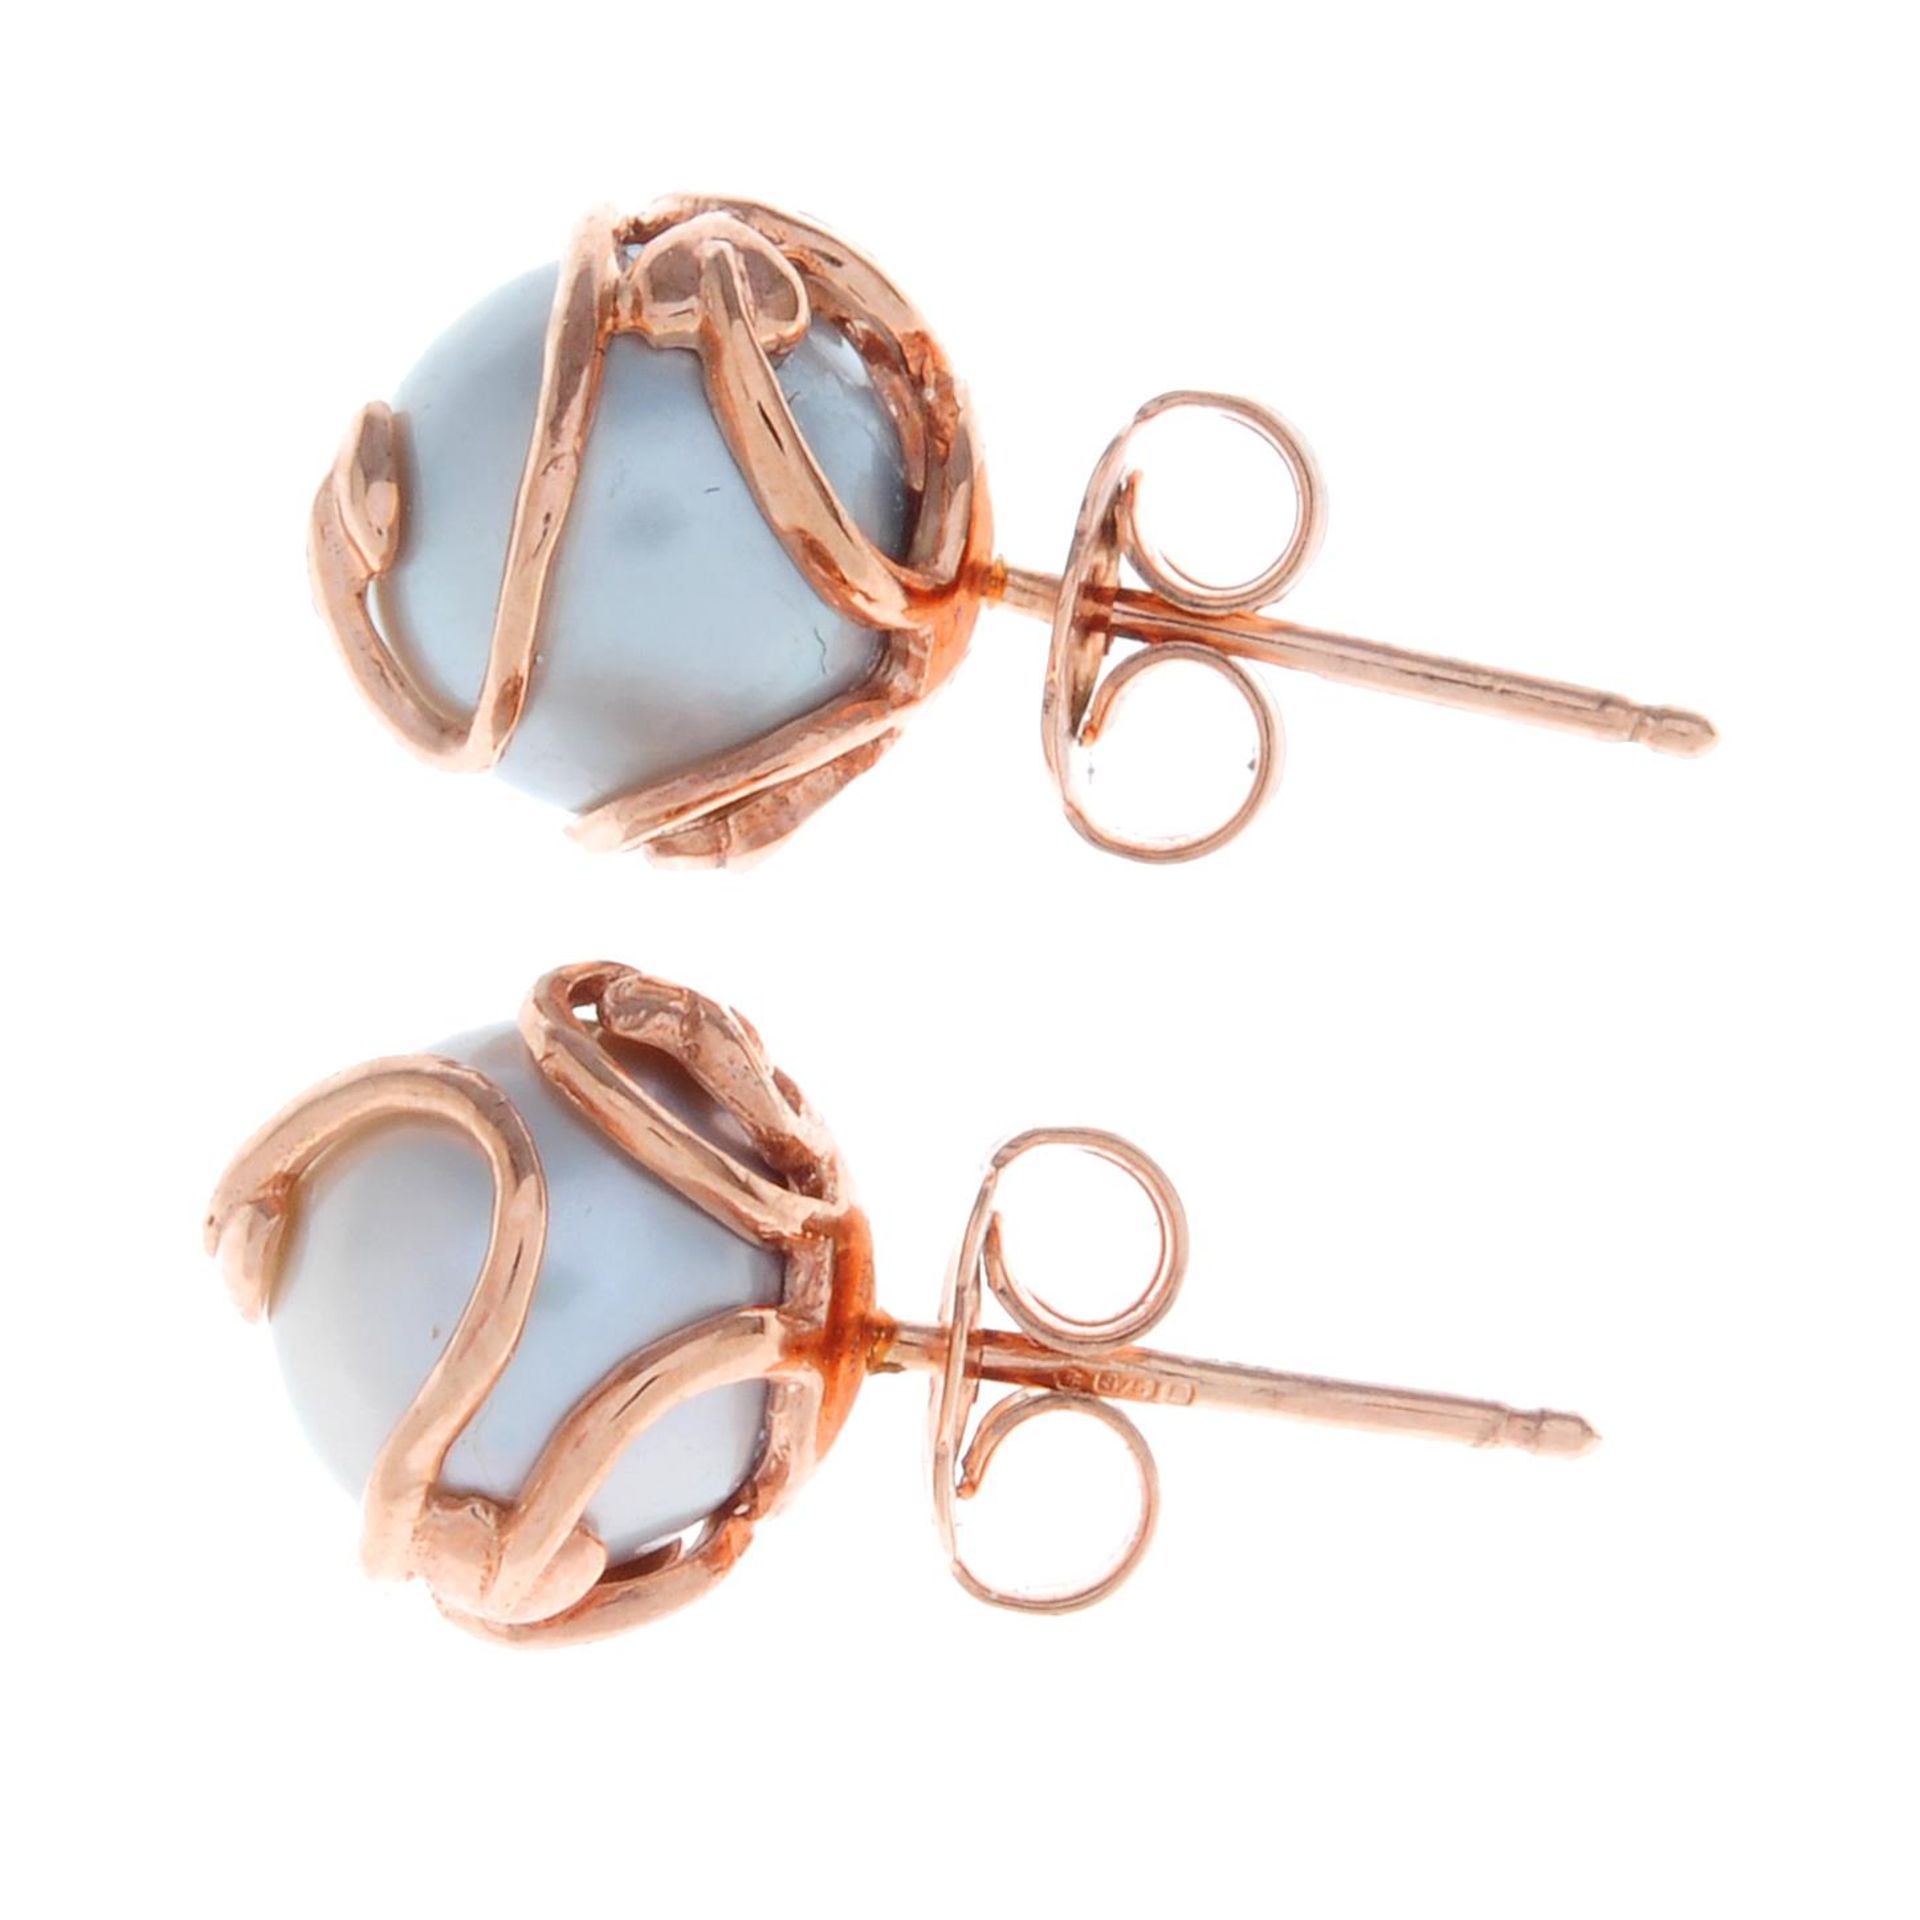 A pair of 9ct gold 'Tree of Life' cultured pearl stud earrings, by Clogau.Signed Clogau. - Image 2 of 2